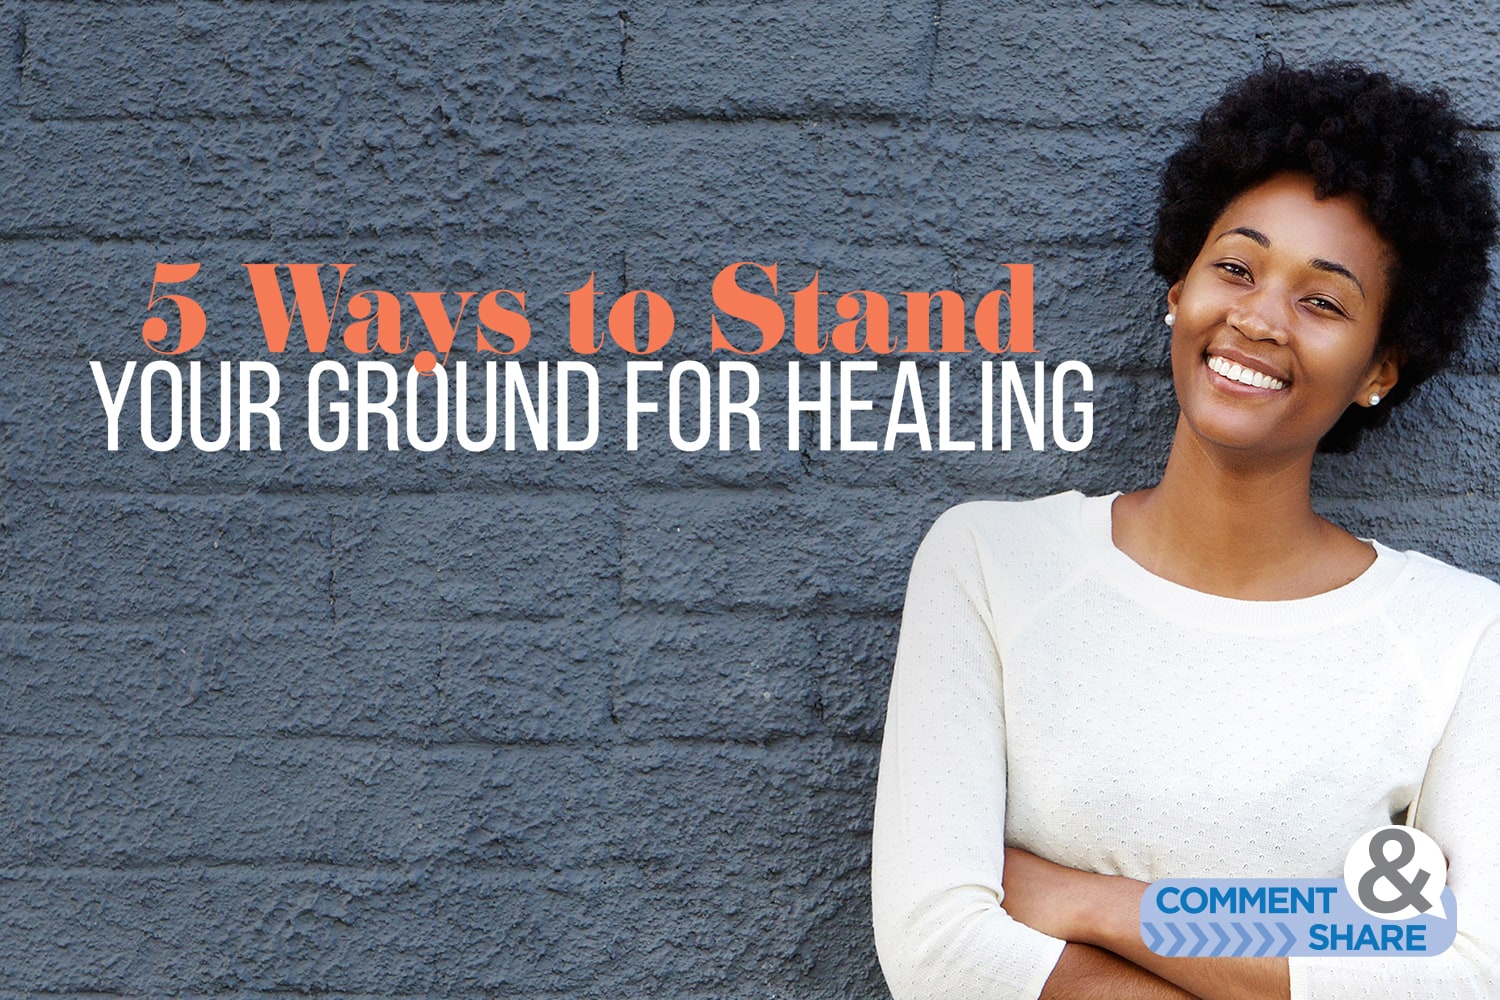 5 Ways to Stand Your Ground for Healing